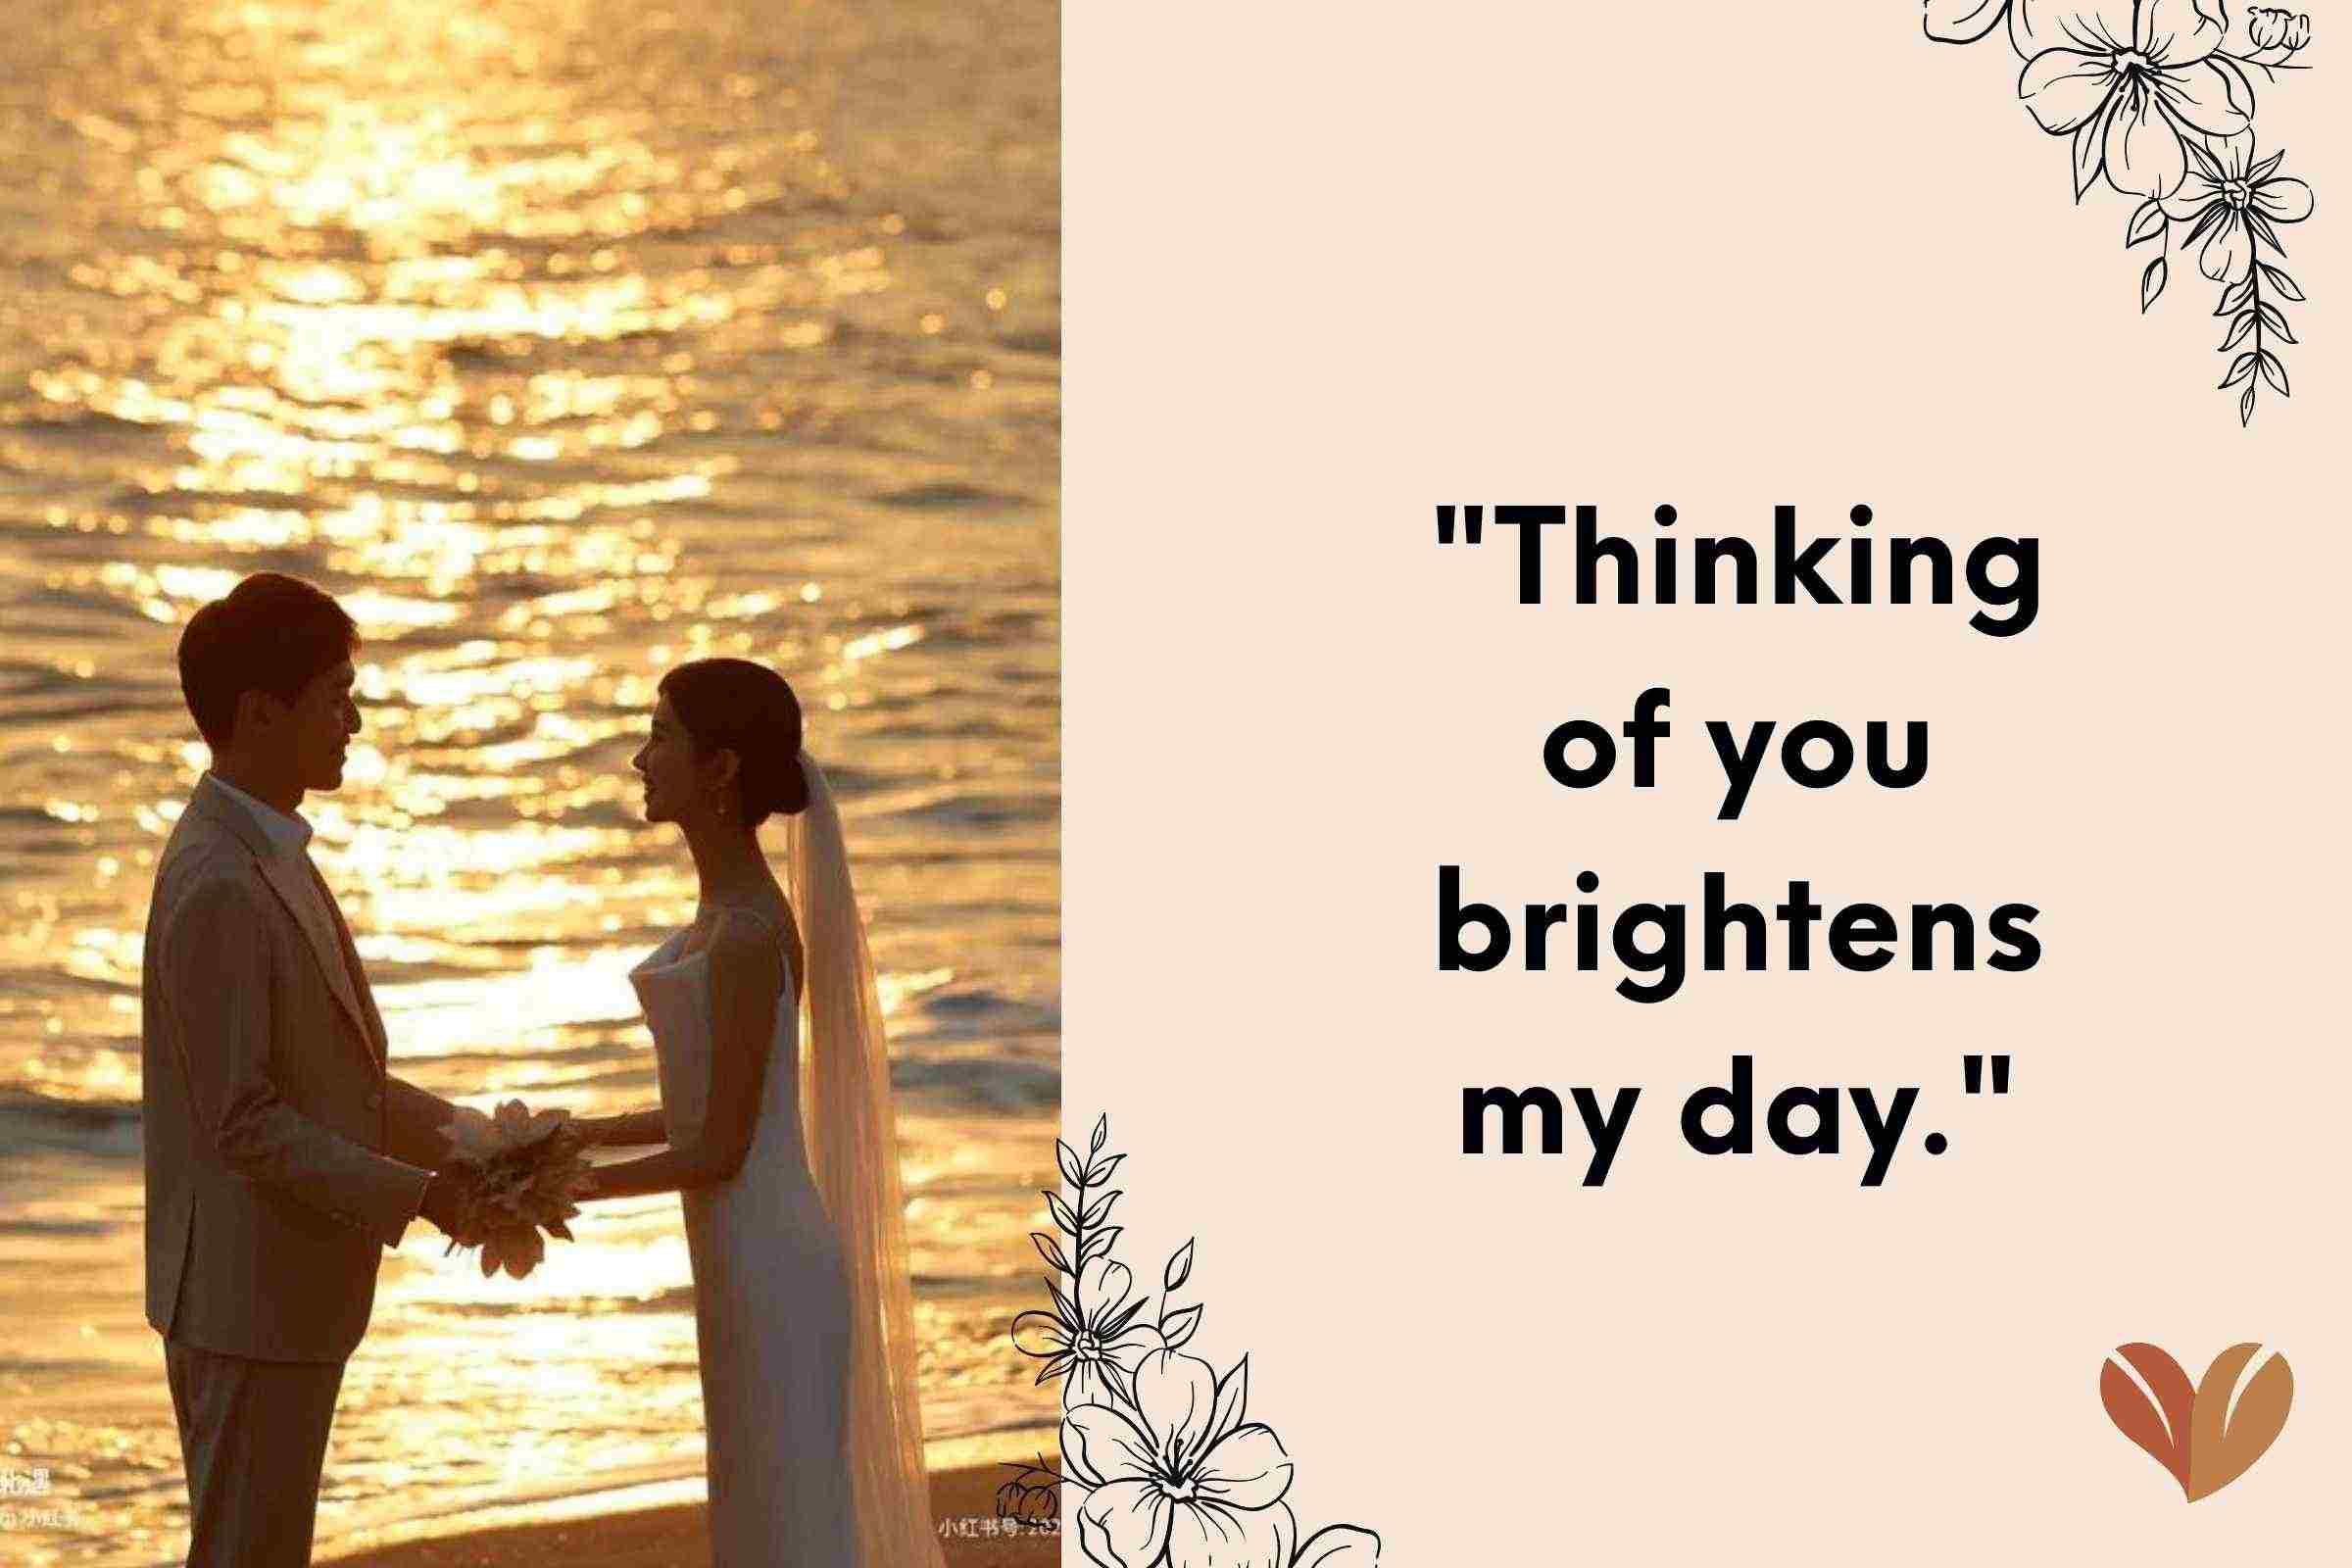 "Thinking of you brightens my day."